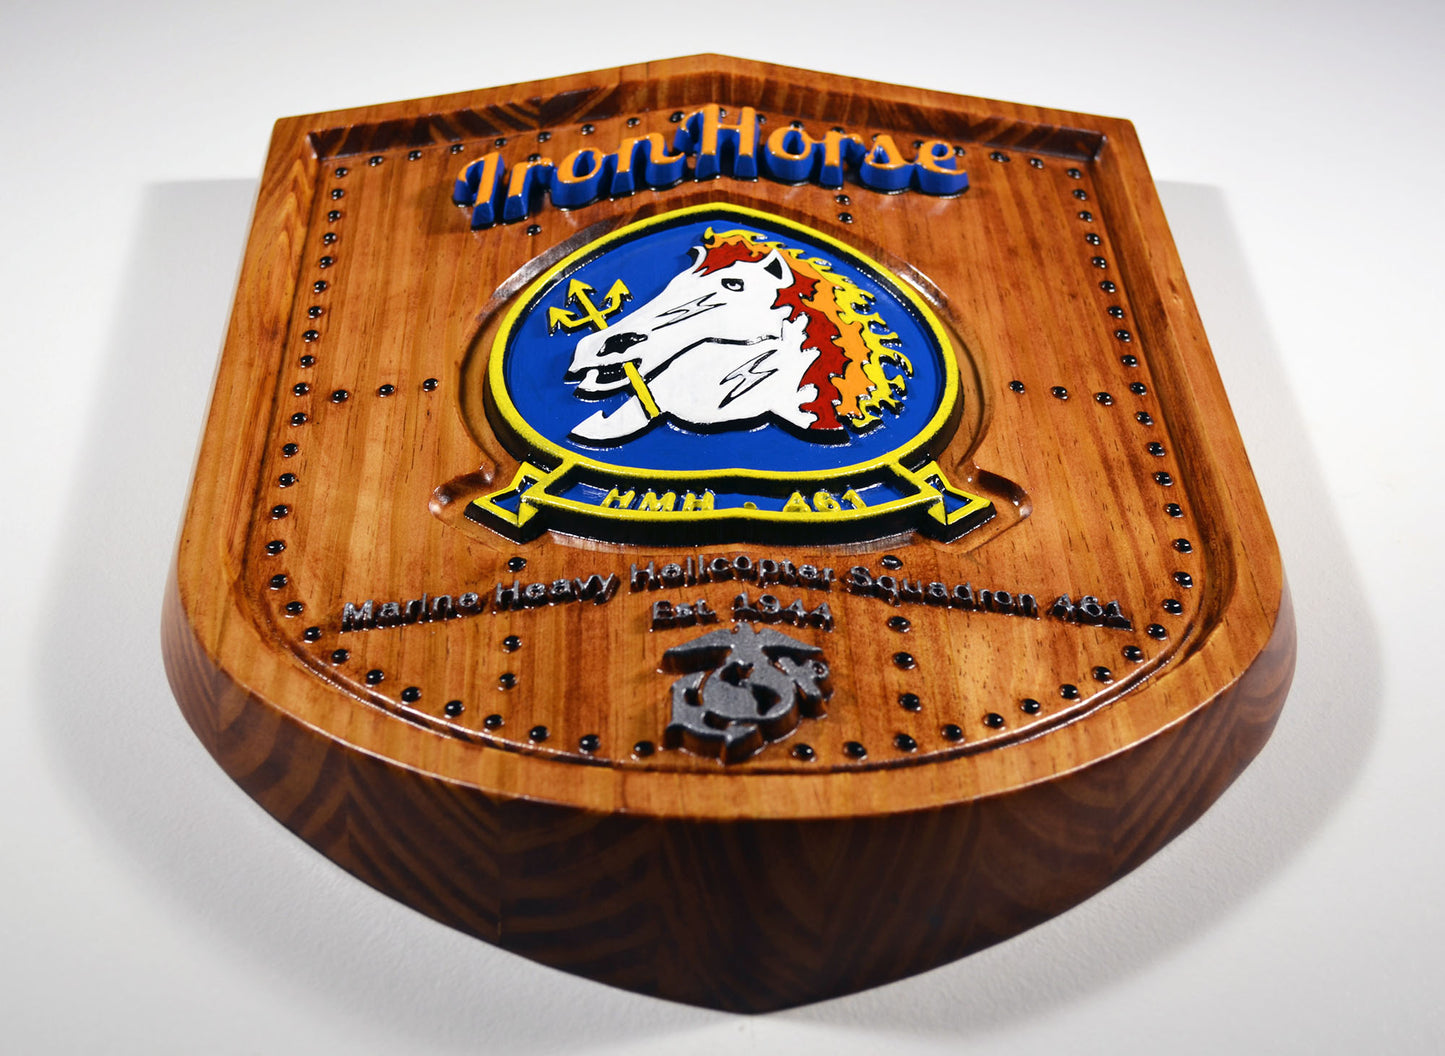 USMC HMH-461, Marine Heavy Helicopter Squadron, 3d wood carving, military plaque, painted version